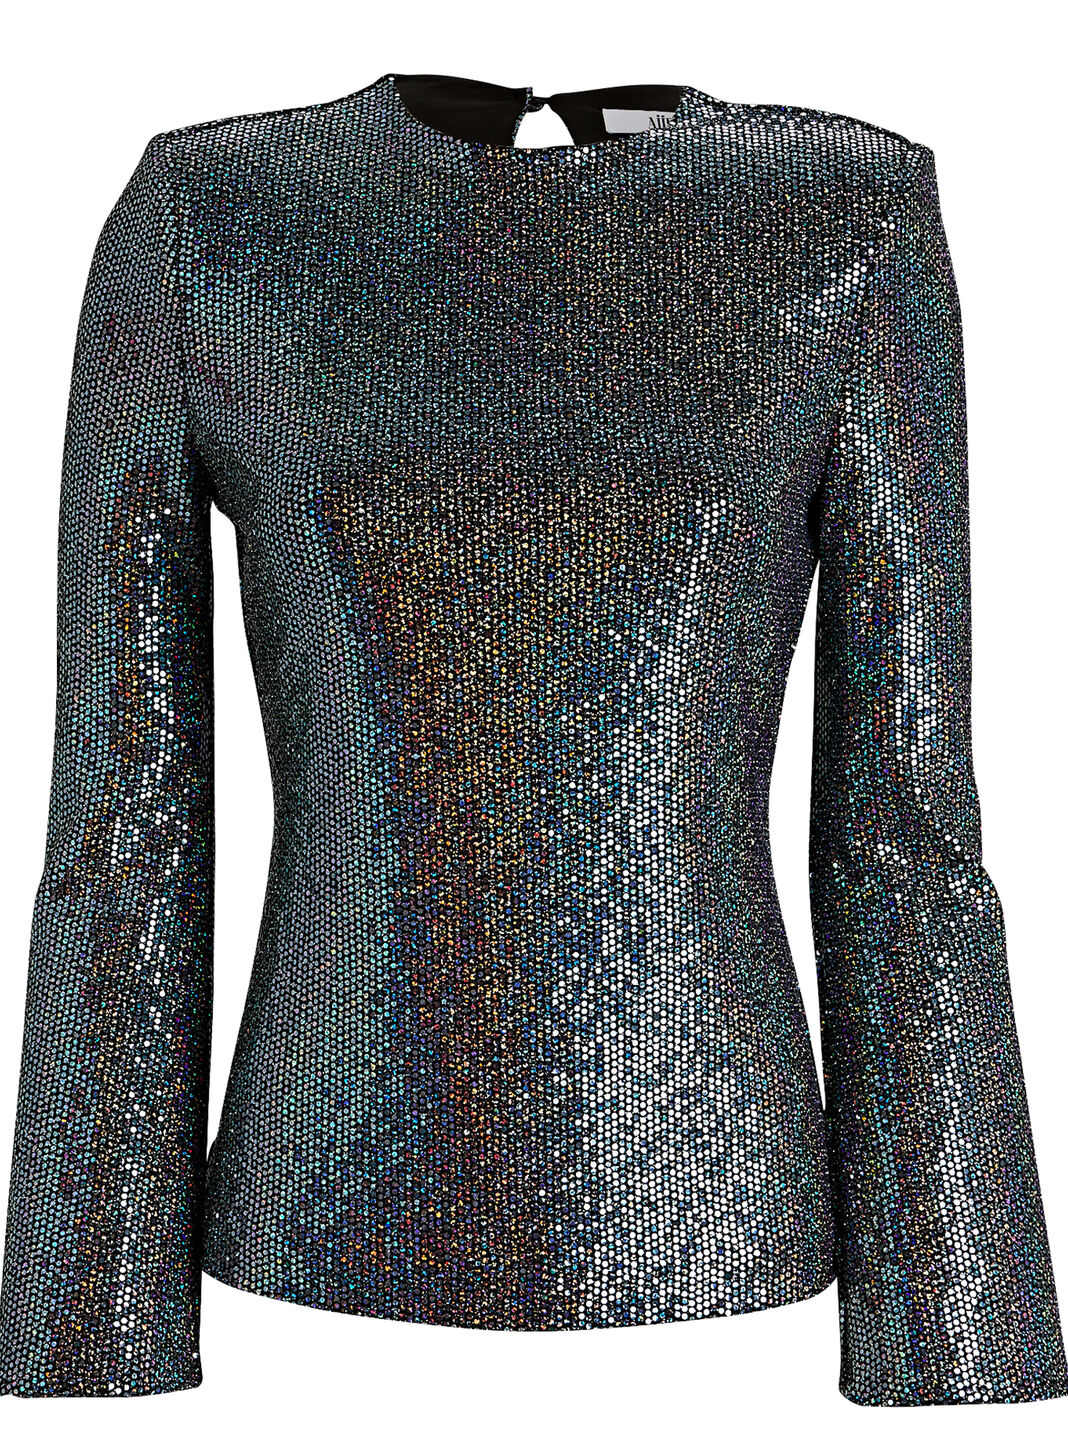 Lola Sequined Top